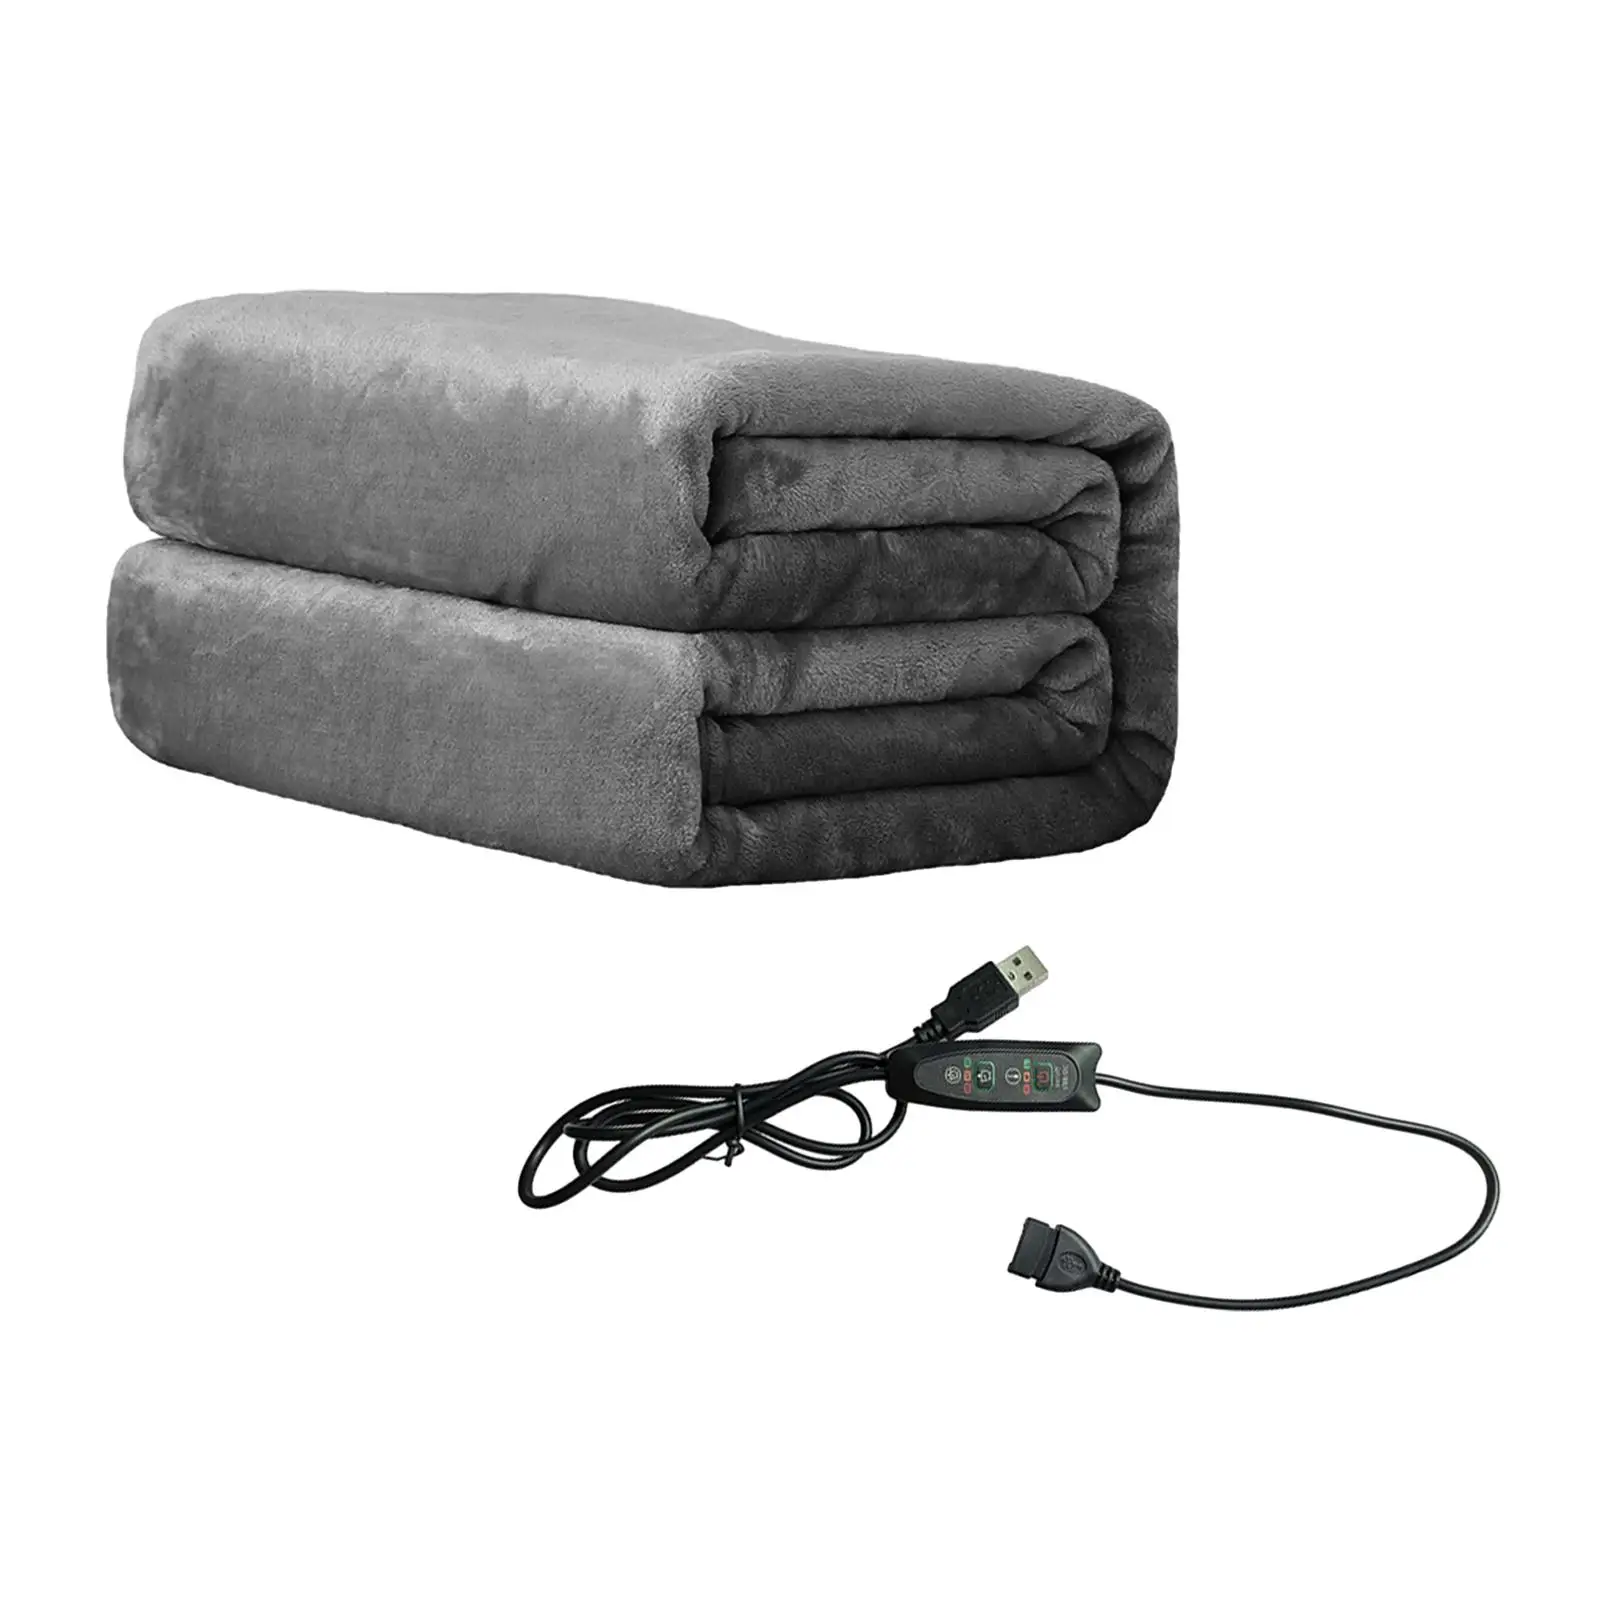 Electric Throw Blanket USB 3 Levels Fast Heating for Office Travel Couch